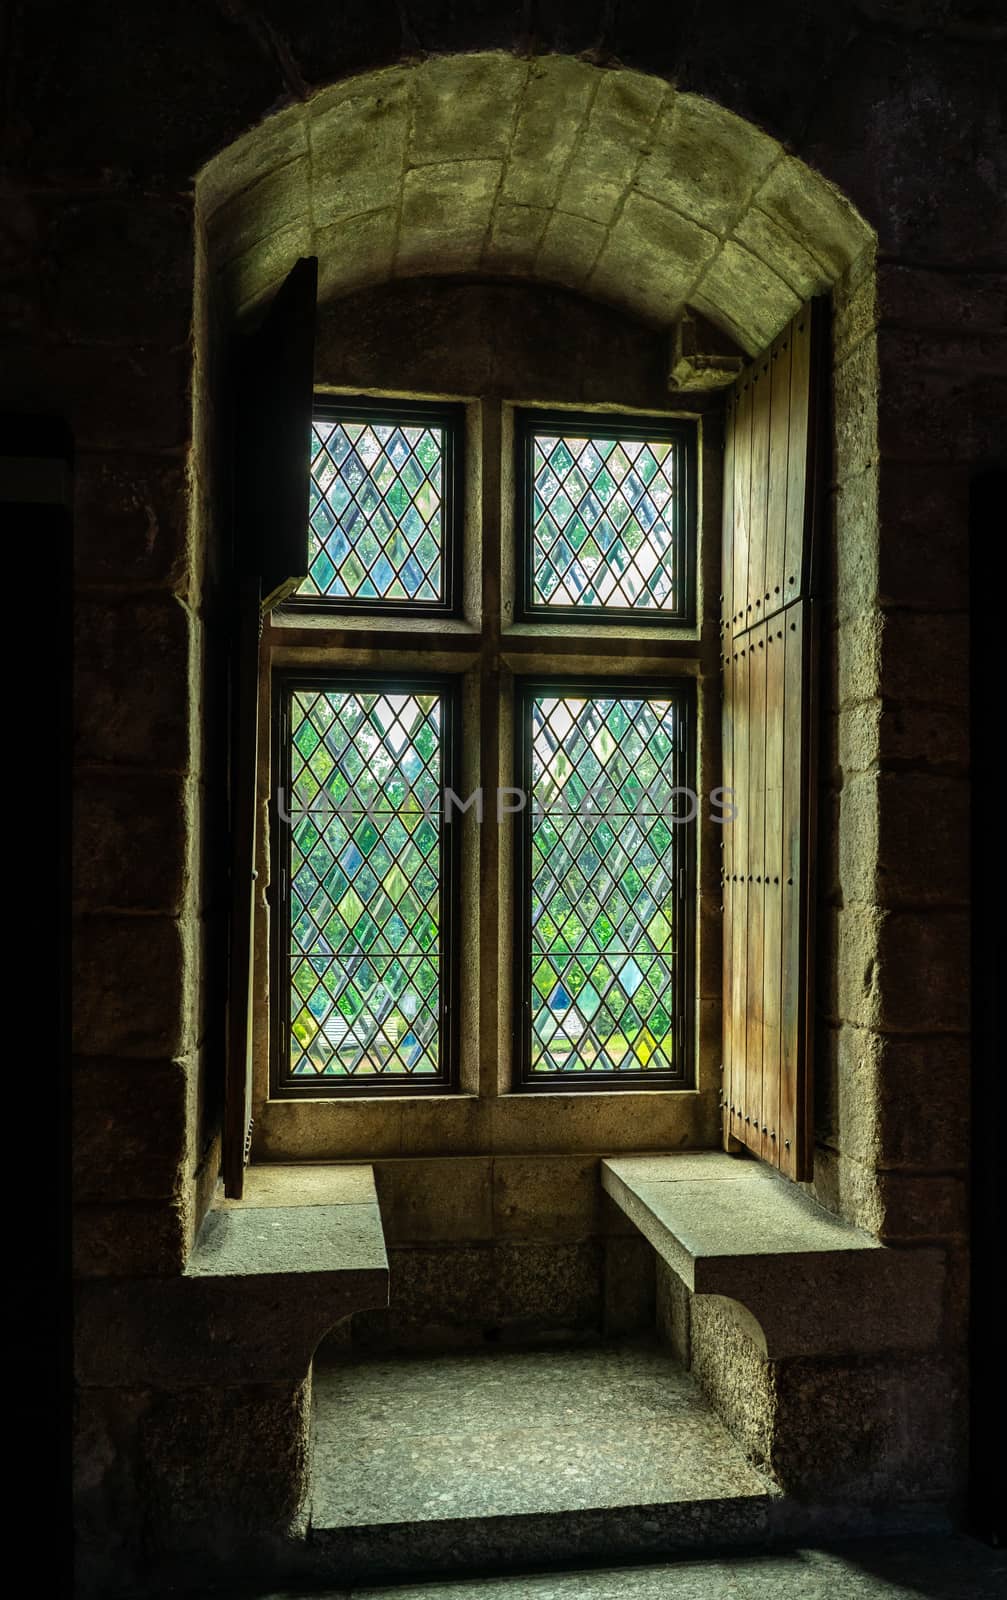 Window seat inside the palace of the Dukes of Braganza by steheap